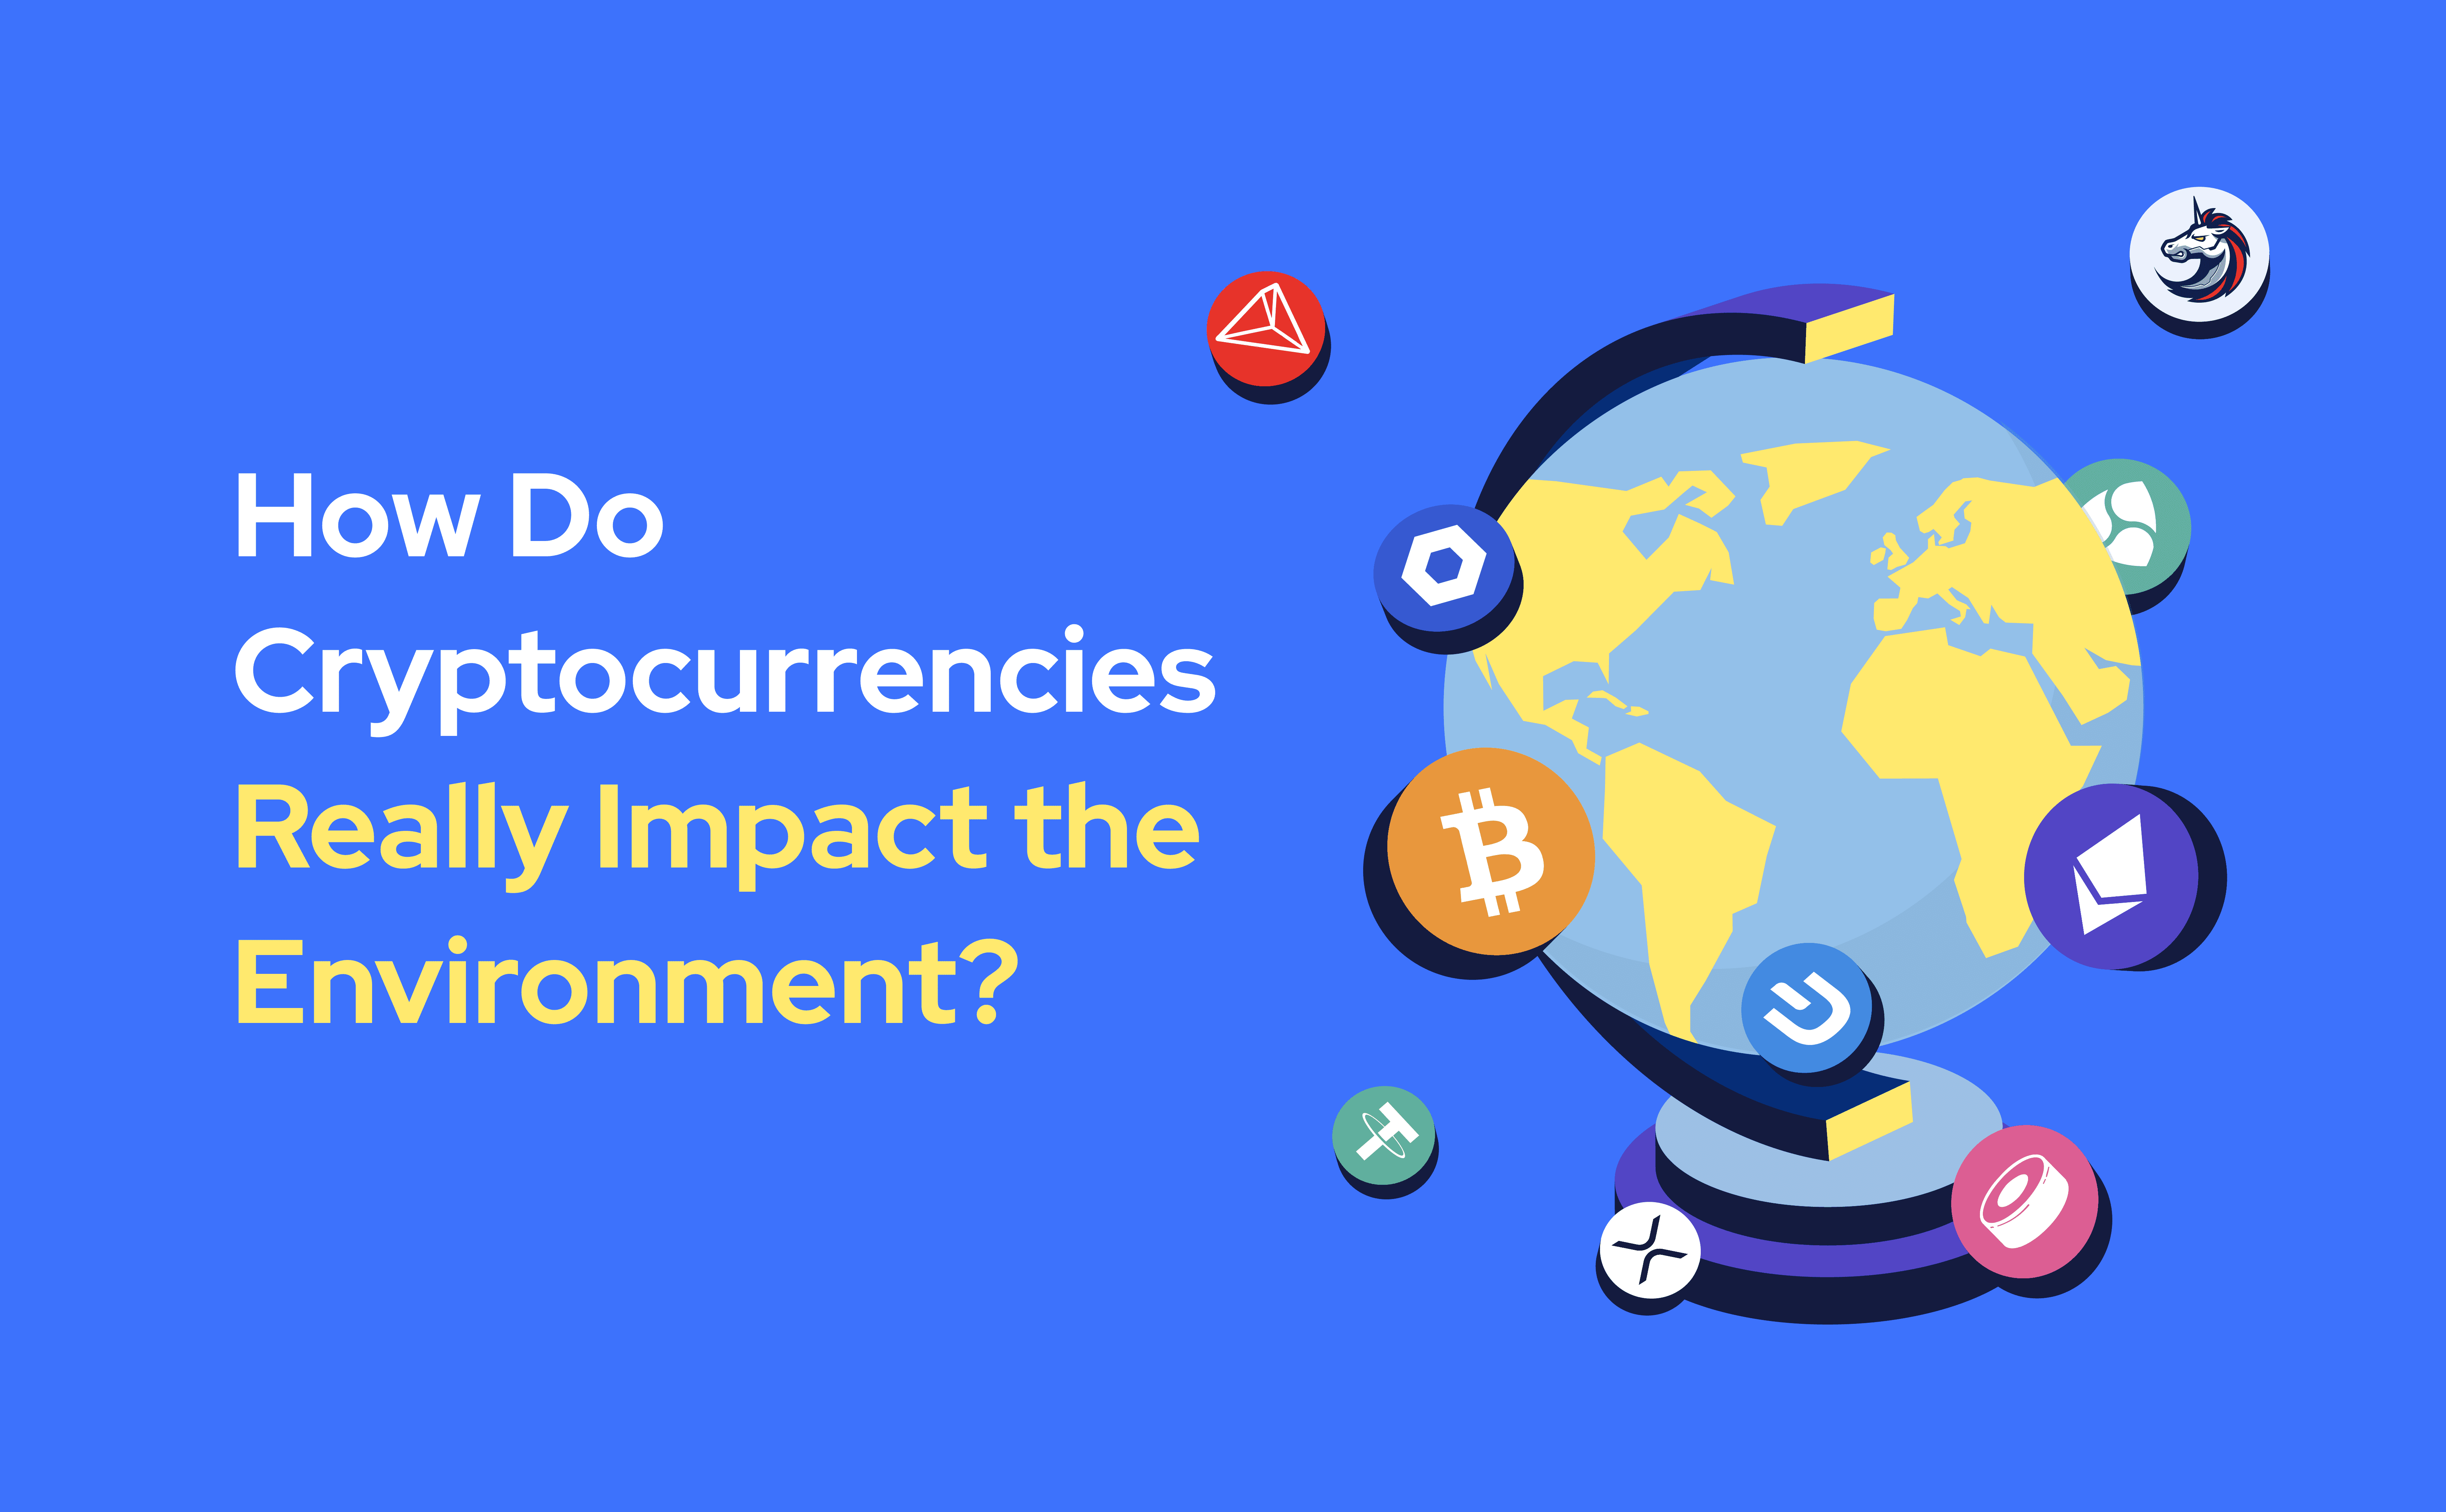 Cryptocurrency environmental impact